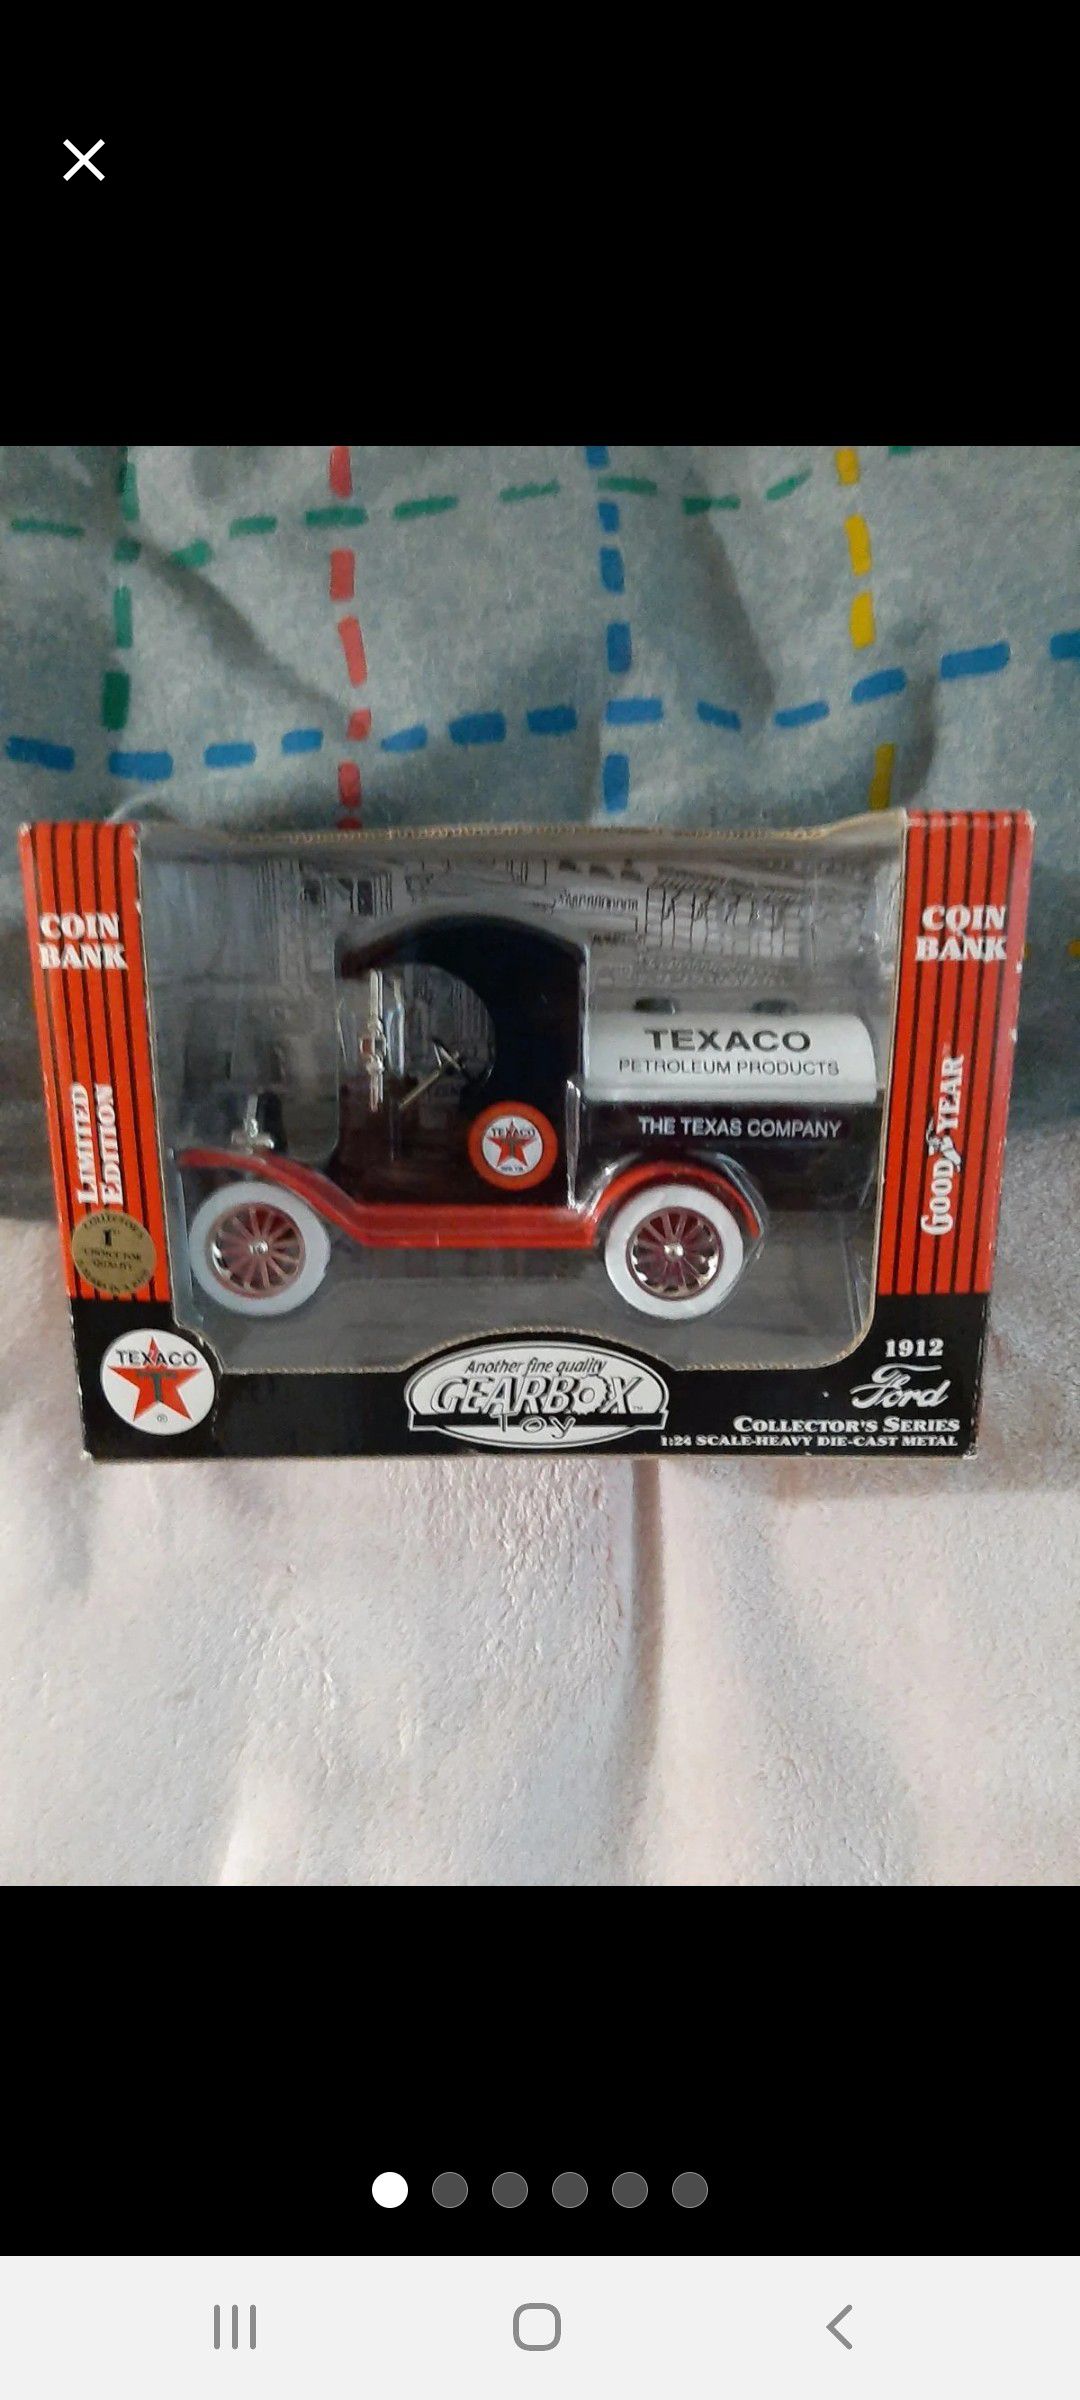 Gearbox Ford~Texaco Oil Tanker Bank ●□●